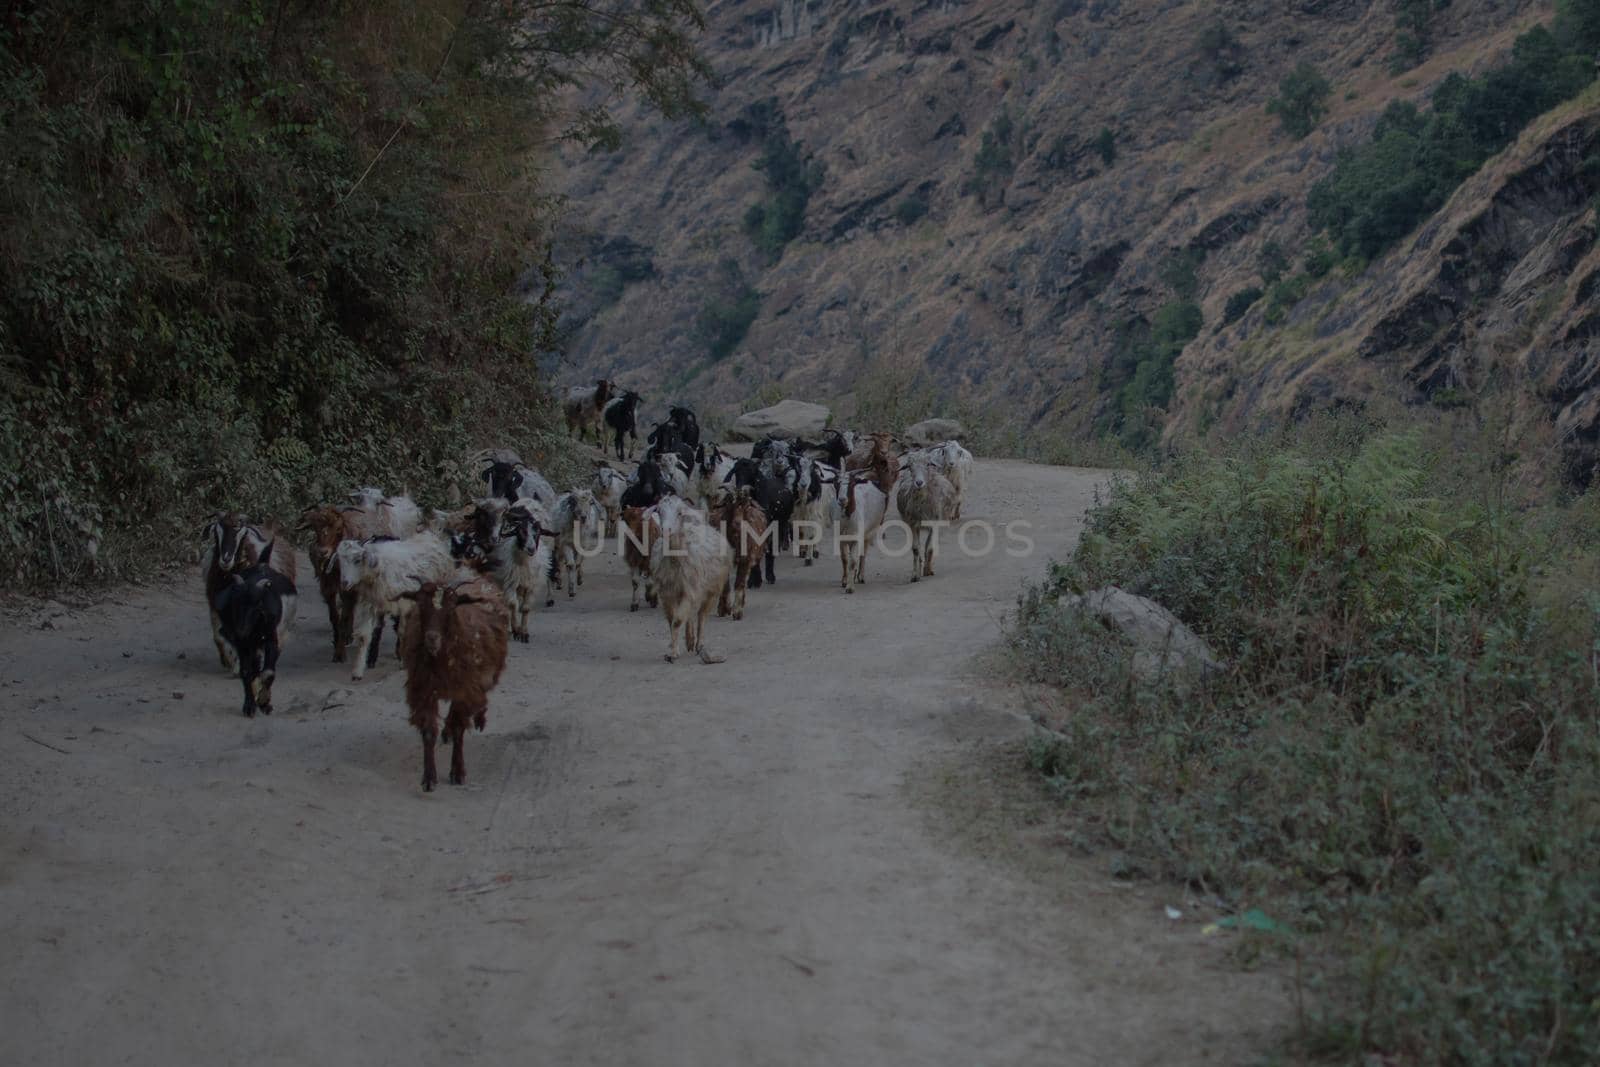 Beautiful goat herd walking on a dirt road in the nepalese mountains